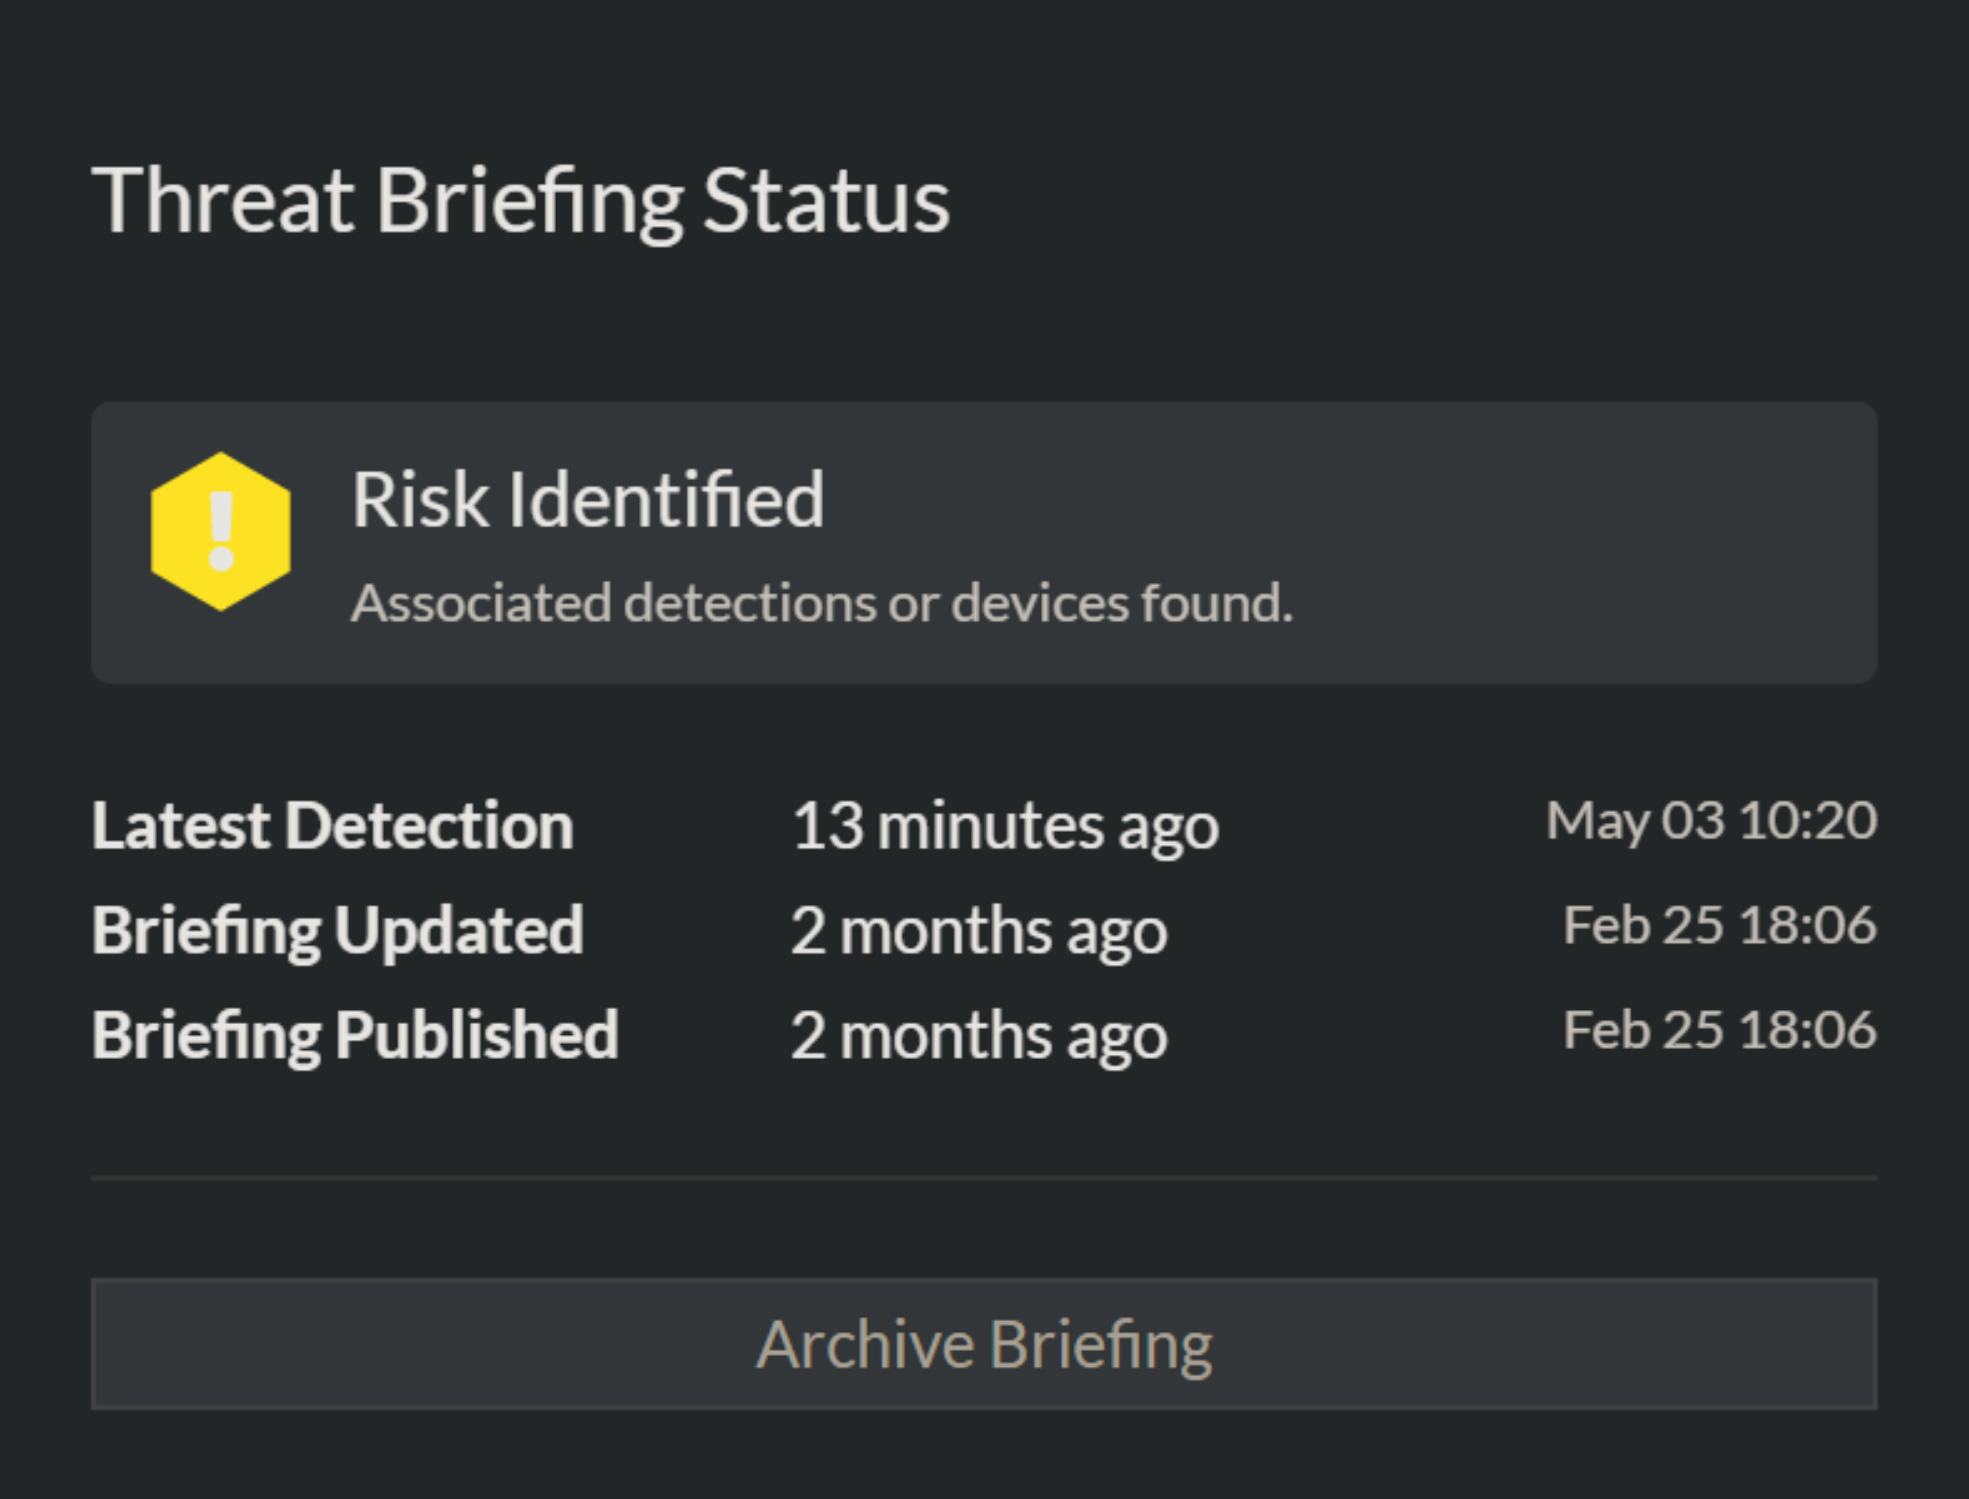 Threat Briefing Status in ExtraHop Reveal(x)